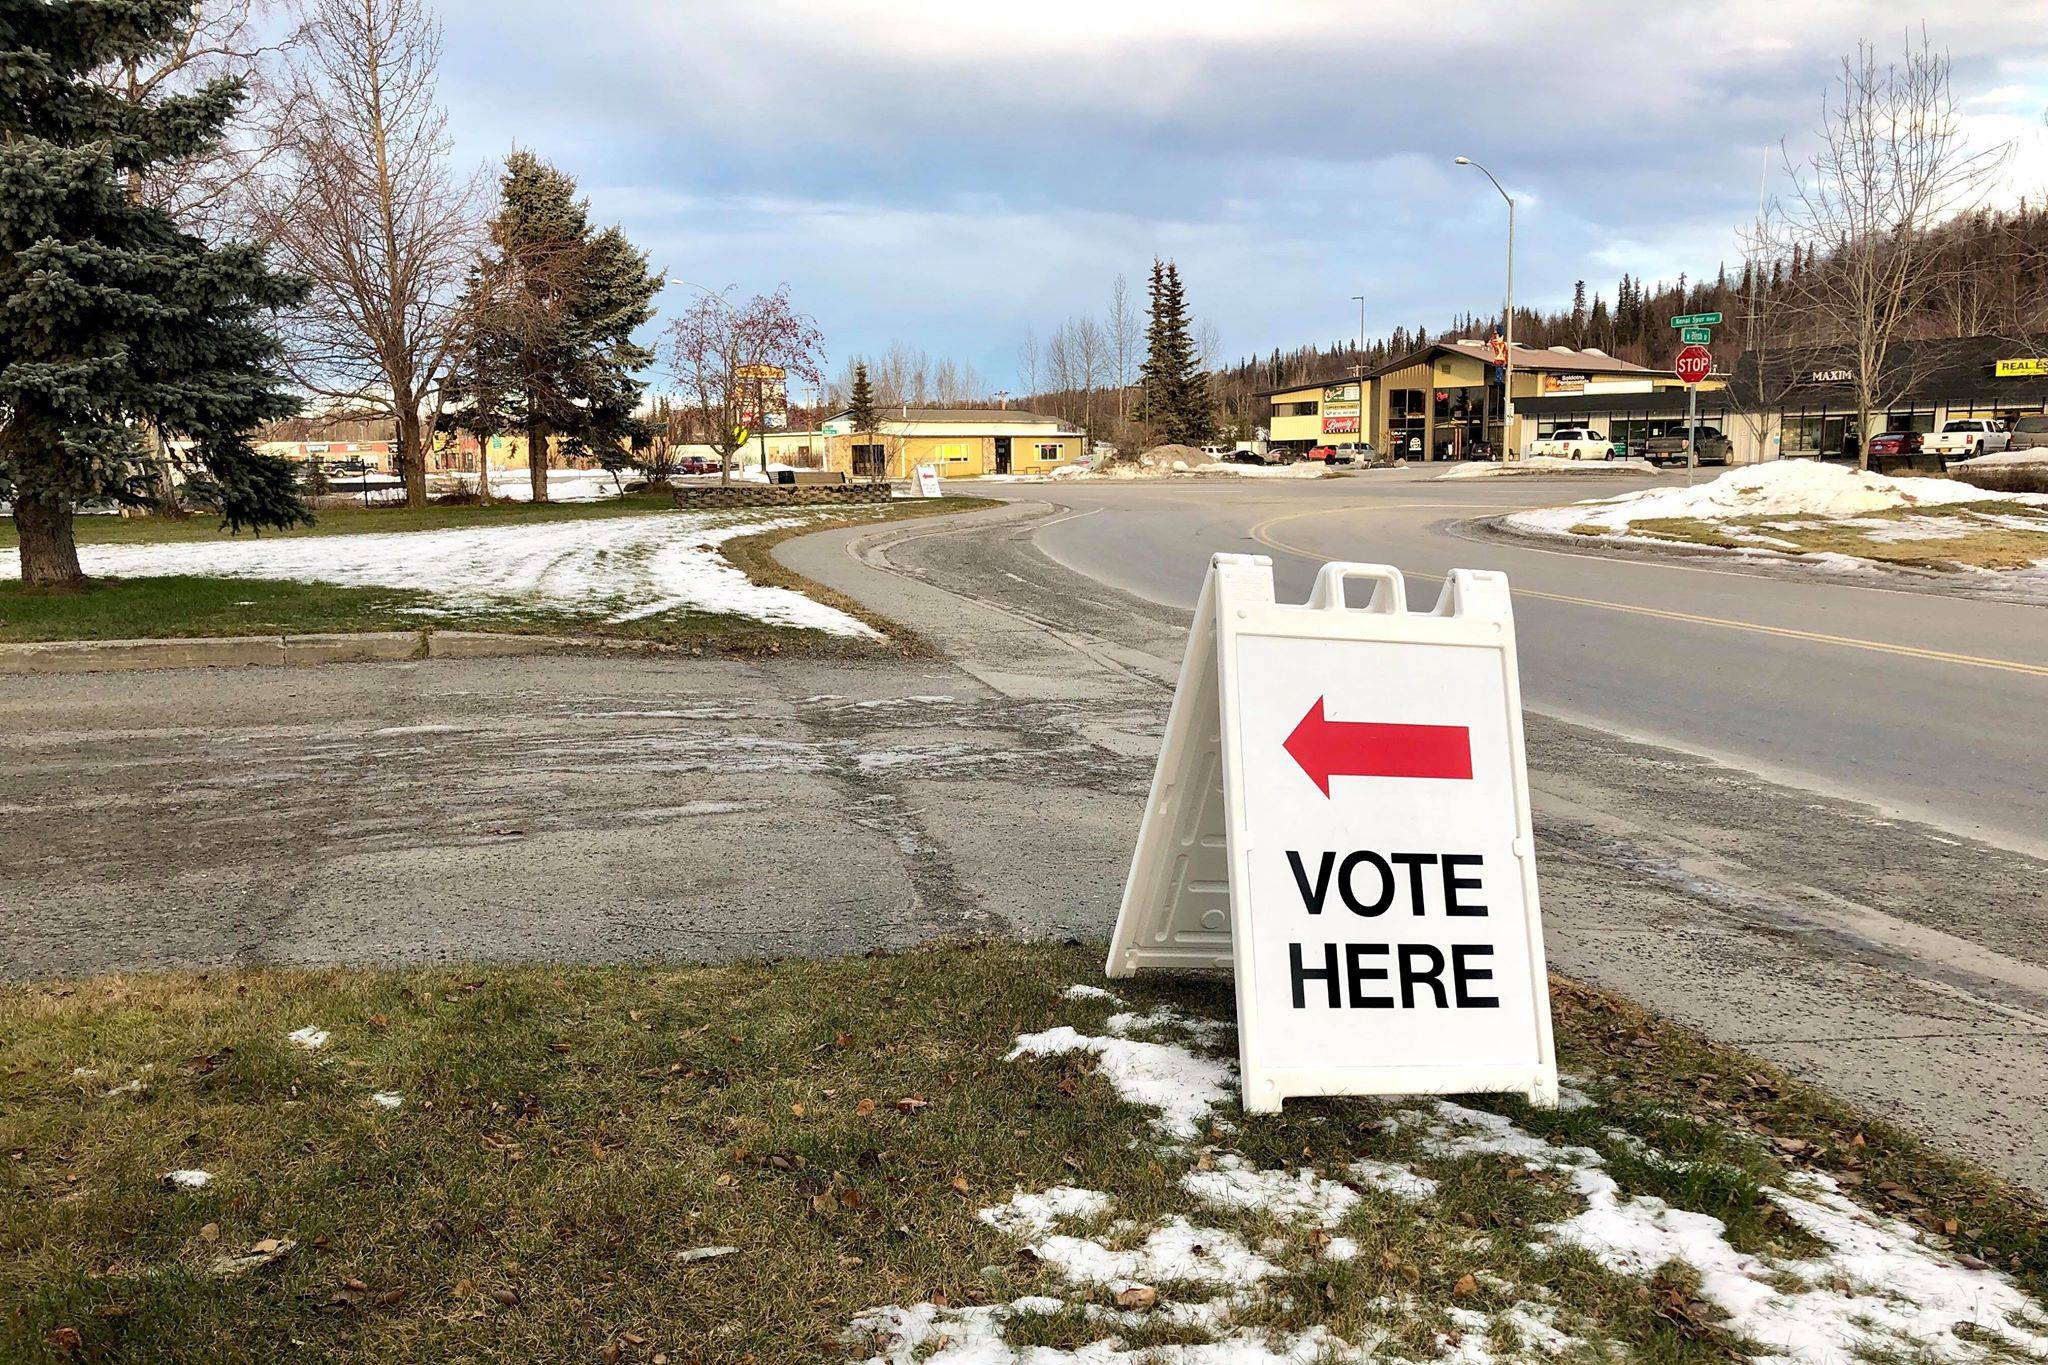 Voters took to Soldotna City Hall to cast their ballots for the city’s next mayor, who will serve until October 2020, Dec. 17, 2019, in Soldotna, Alaska. (Photo by Victoria Petersen/Peninsula Clarion)